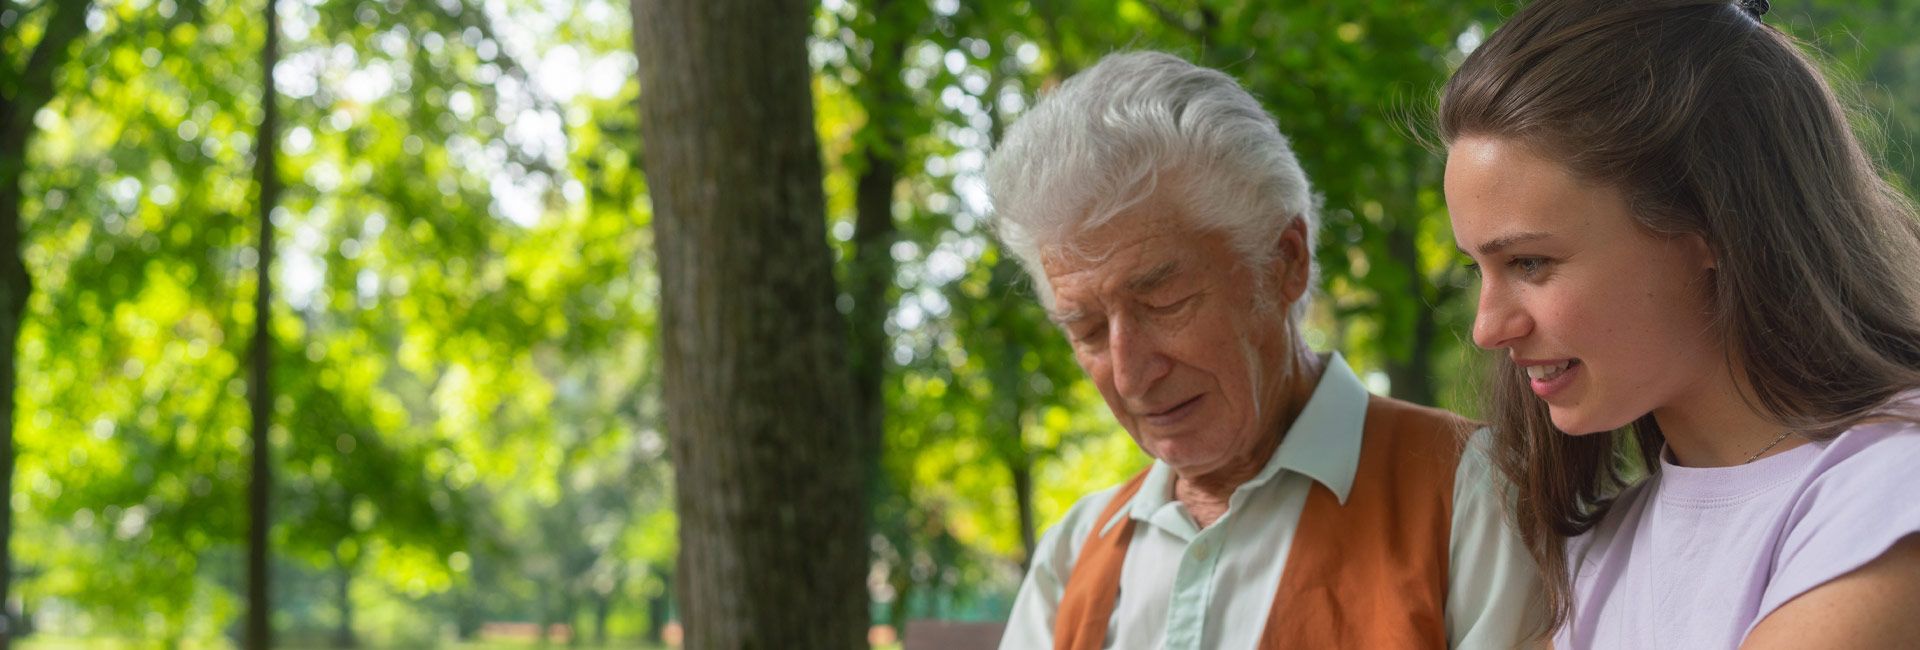 An older man talking with an younger woman on a park bench